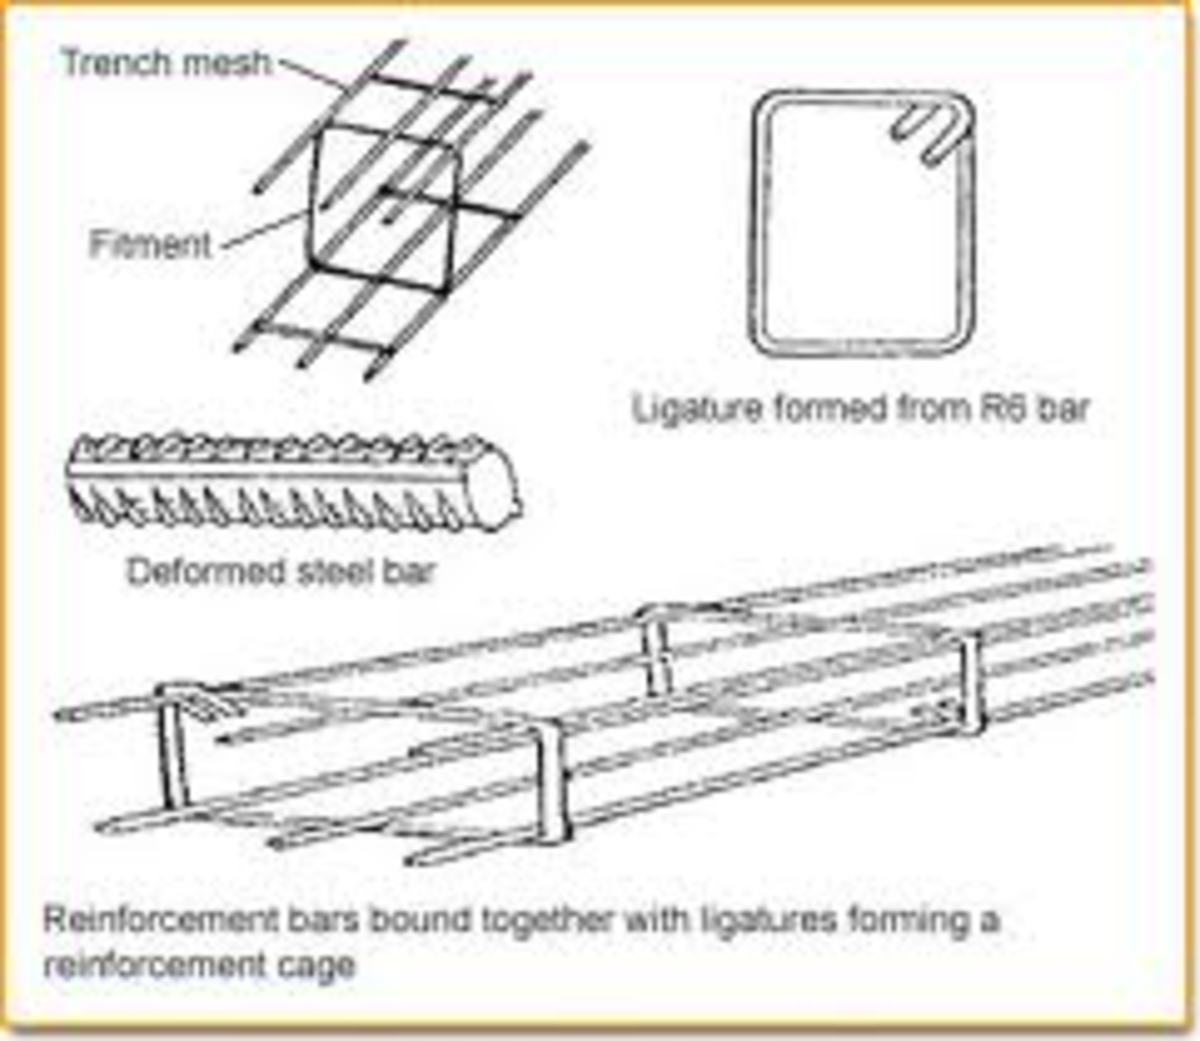 Here are some typical steel reinforcement used in buildings, there are many more types and sizes. Note the way the steel has been tied up for the foundations or beams, there are also loose steel bars that could be used, we used 4 10 mm rods in stumps